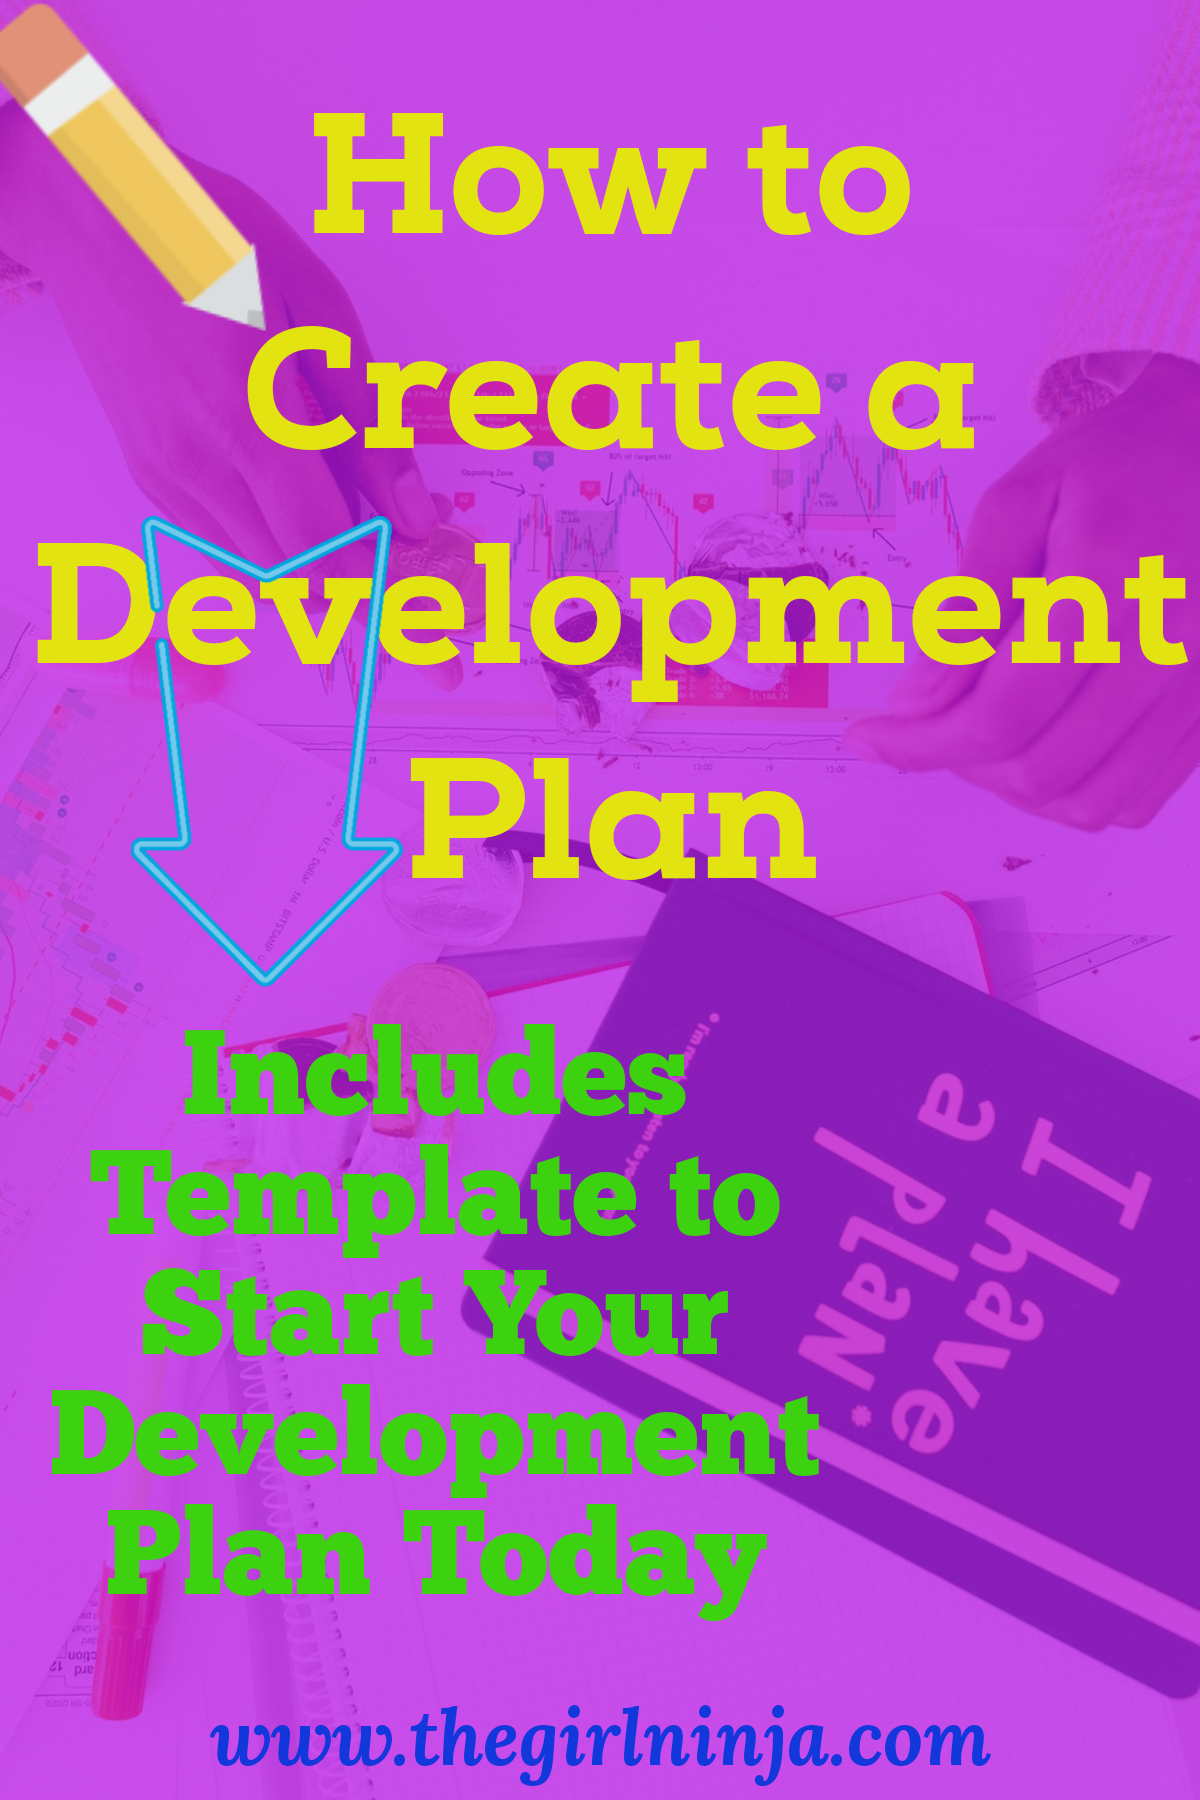 Hands rest on a paper with colorful trends atop a notebook with block letters that spell I have a plan. A translucent purple rectangle covers papers and notebook with a pencil coming out of the top left corner pointing to yellow text that reads How to Create a Development Plan. A Blue outline of an arrow points from yellow text to green text that reads Includes Template to Start Your Development Today.  At bottom center blue text reads www.thegirlninja.com